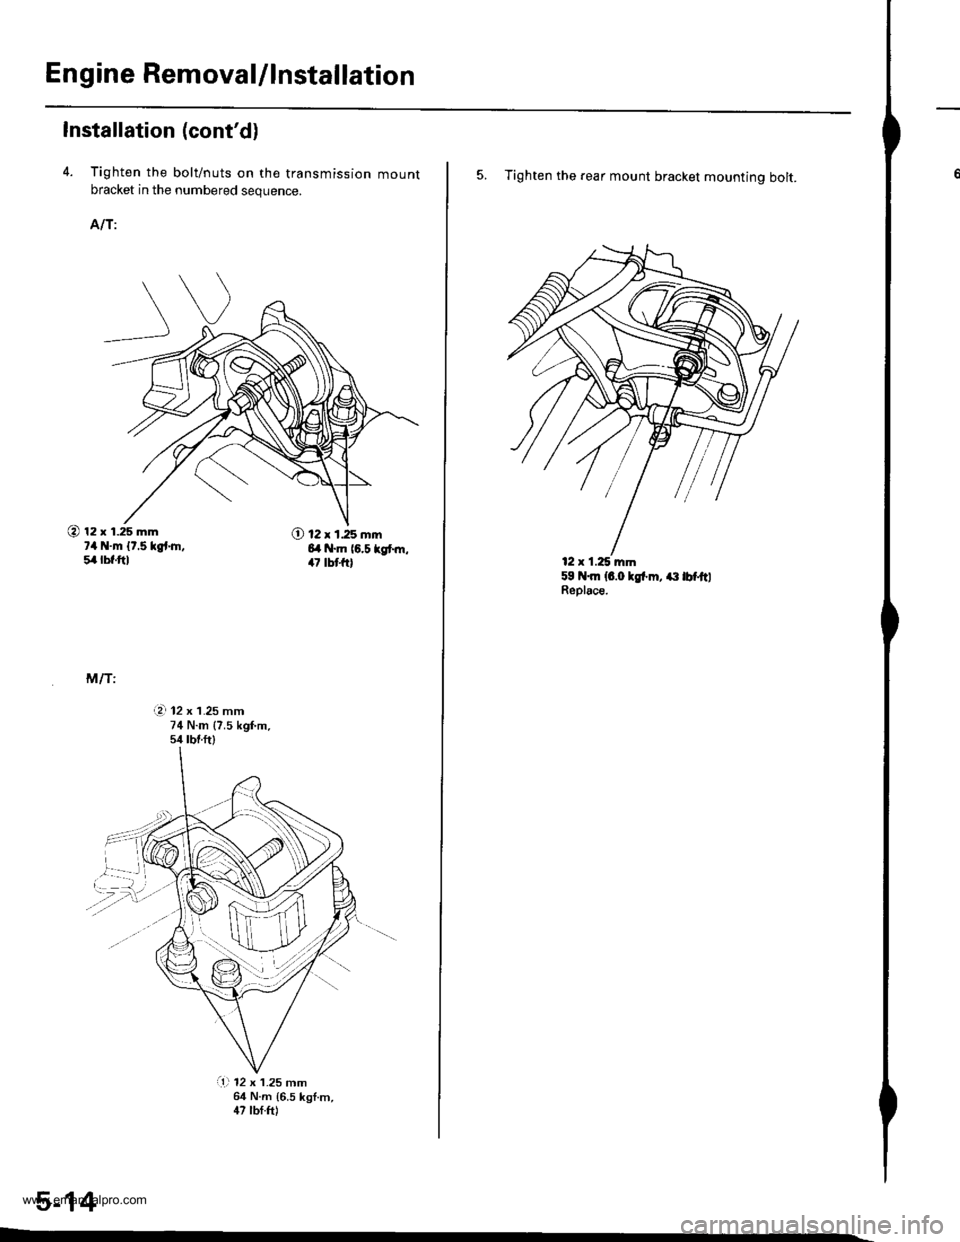 HONDA CR-V 1997 RD1-RD3 / 1.G Owners Manual 
En gine RemovaUlnstallation
Installation (contd)
4. Tighten the bolt/nuts on the transmission mountbracket in the numbered sequence.
AIT:
@ 12 x 1.25 mm?4 N.m {t.5 kgt.h,5,4lbf.ftl
O 12 x 1.25 mm6l 